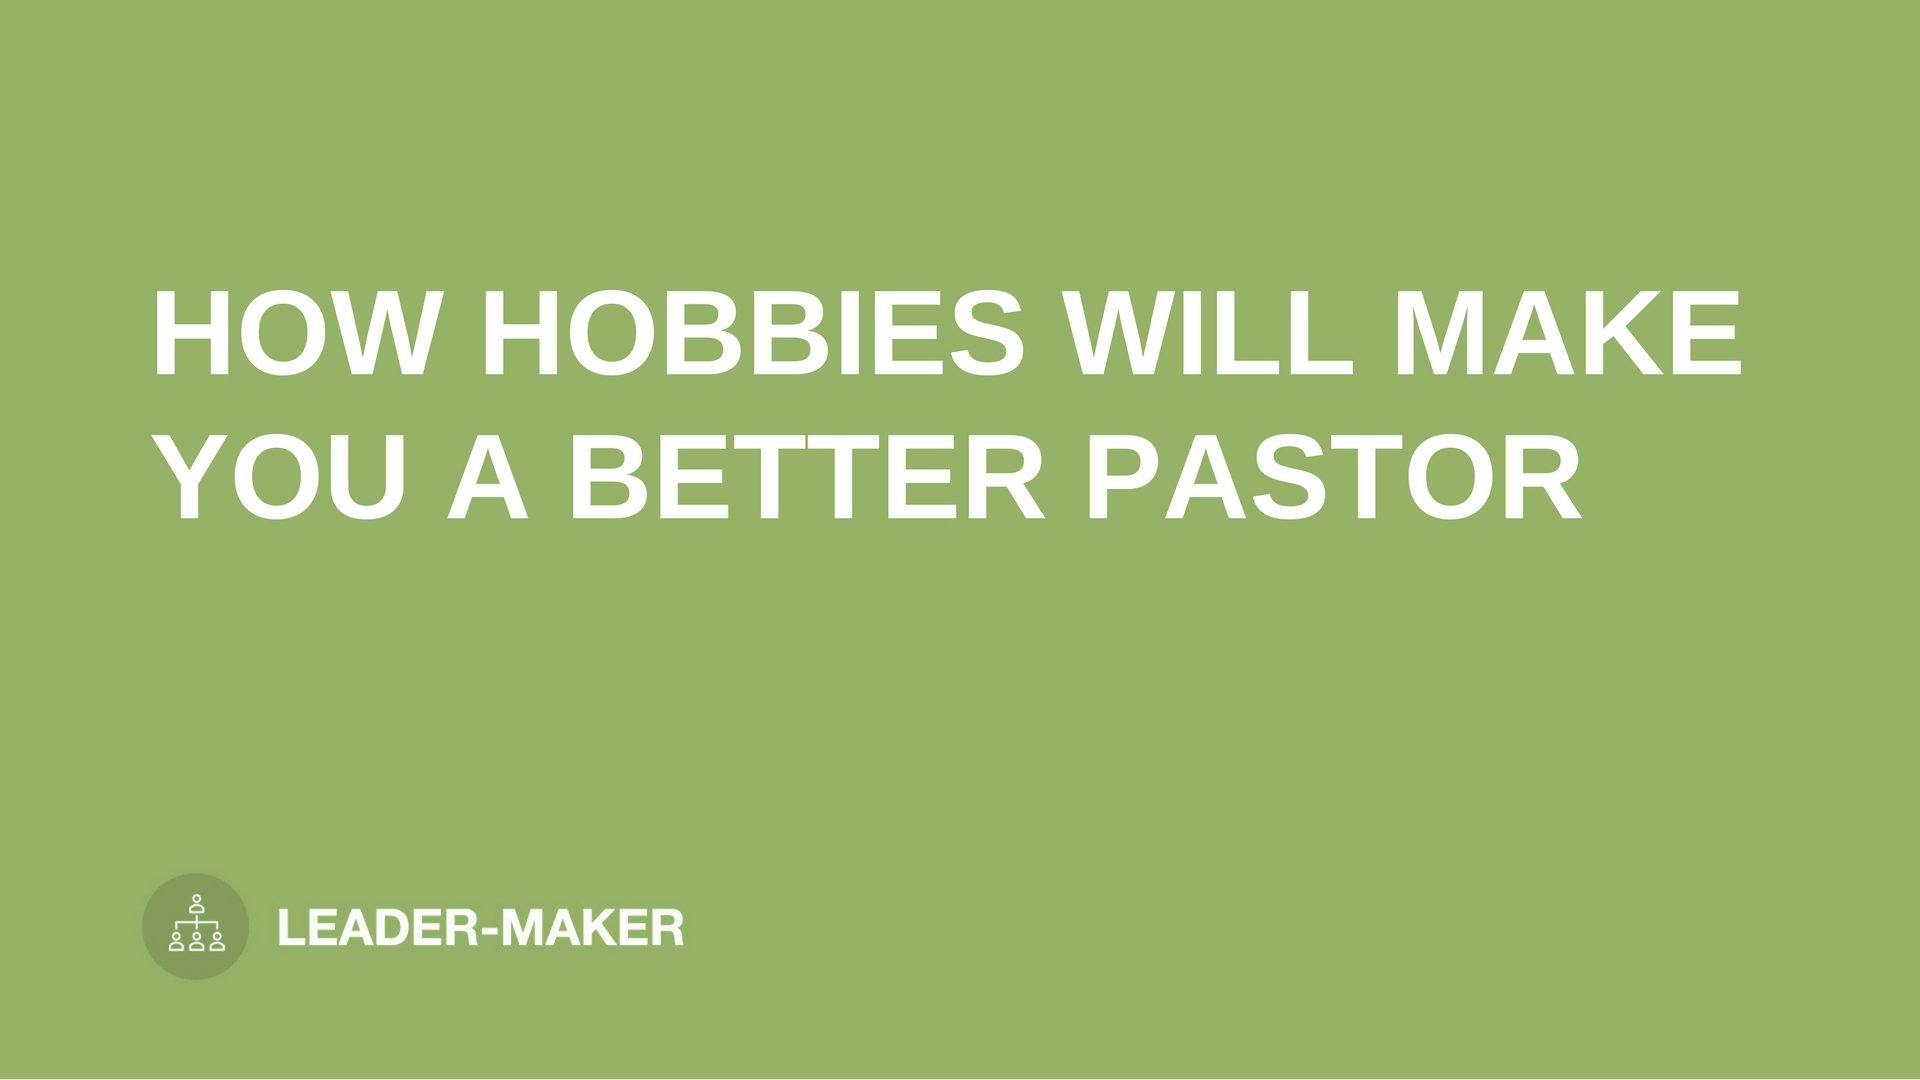 text "HOBBIES WILL MAKE YOU A BETTER PASTOR" on green background leaders.church